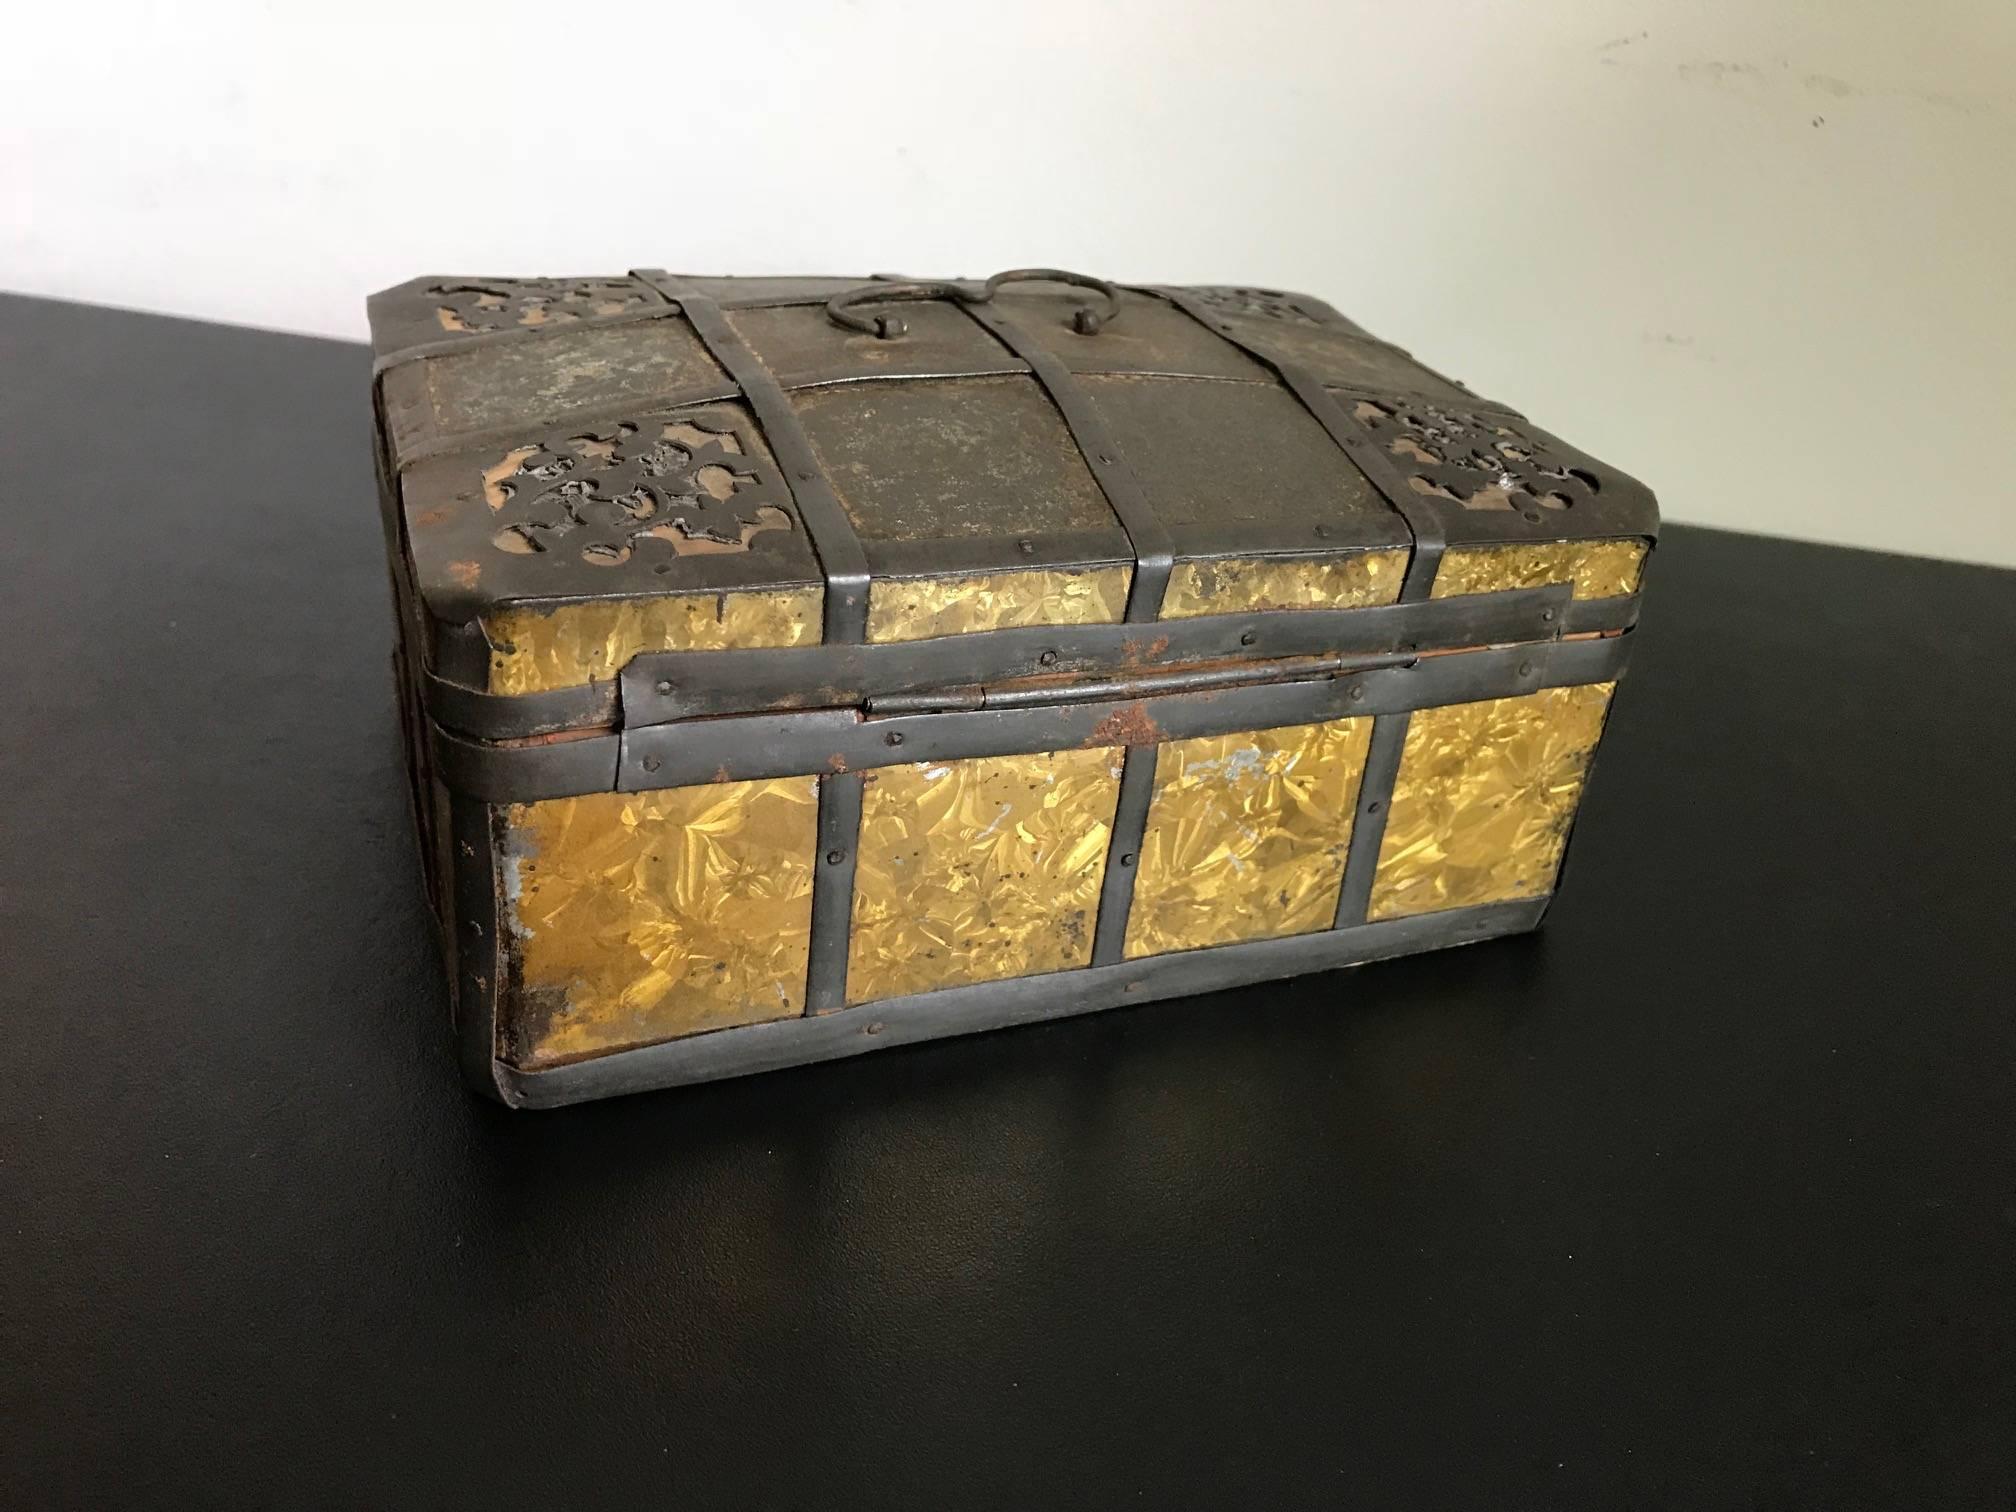 19th Century Russian Gilt Iron-Bound Box with Original Key In Good Condition For Sale In Stamford, CT